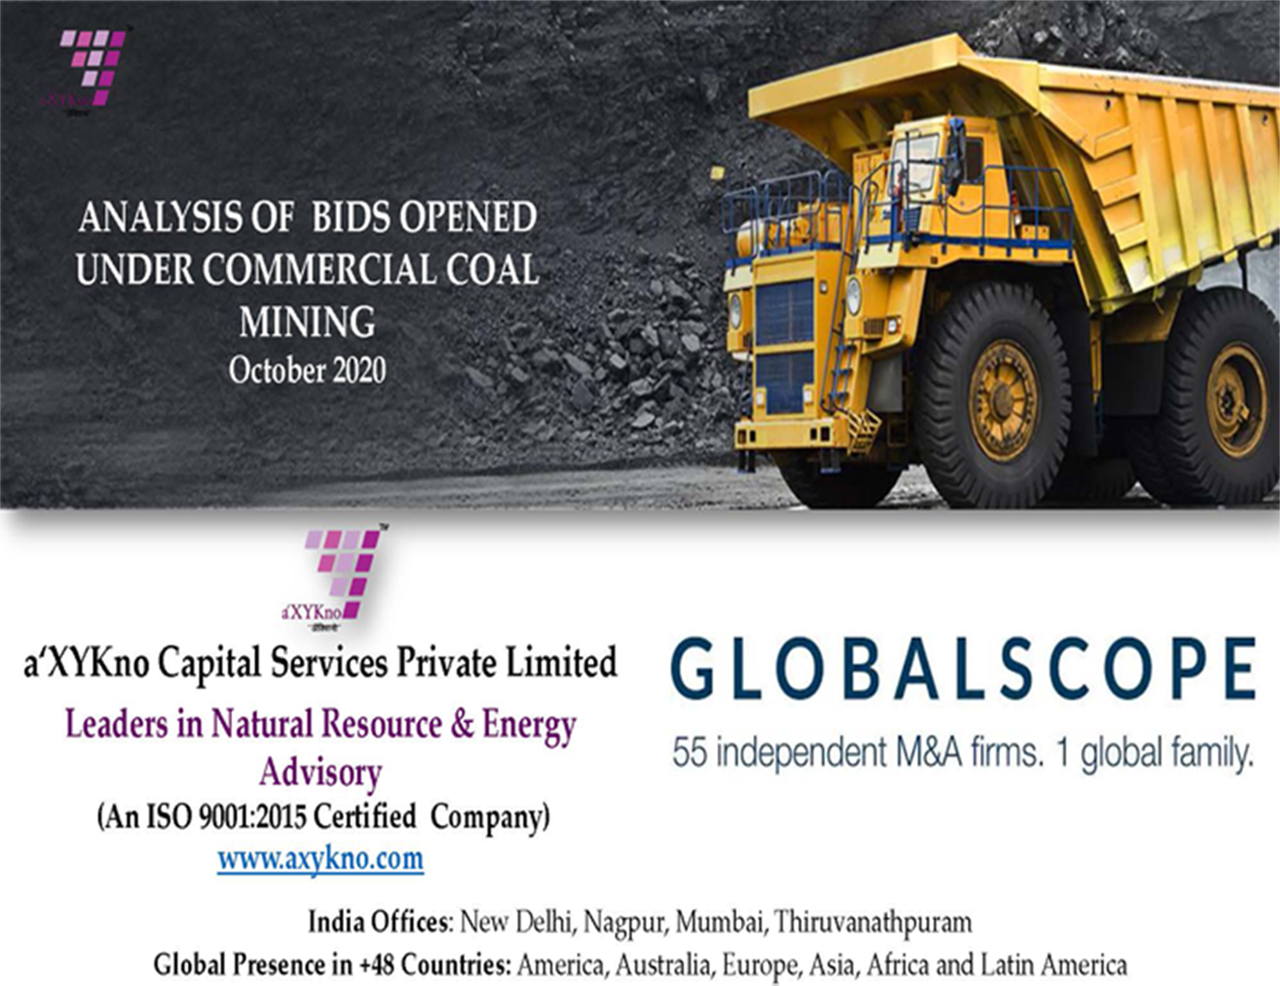 Oct 2020:ANALYSIS OF BIDS OPENED UNDER COMMERCIAL COAL MININGtry 